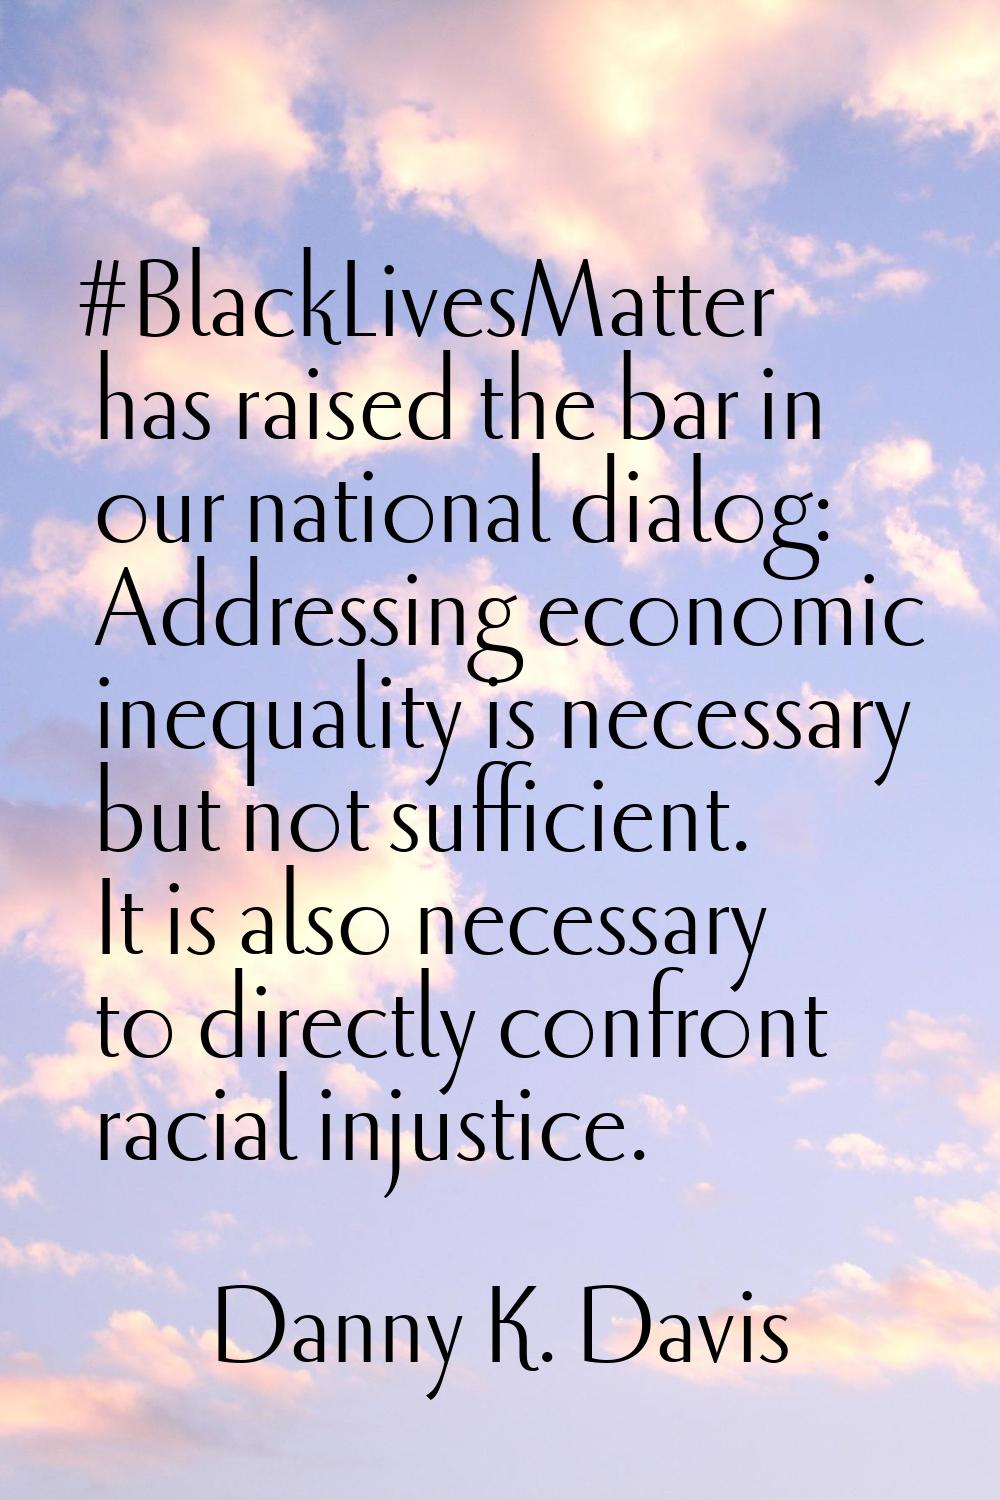 #BlackLivesMatter has raised the bar in our national dialog: Addressing economic inequality is nece